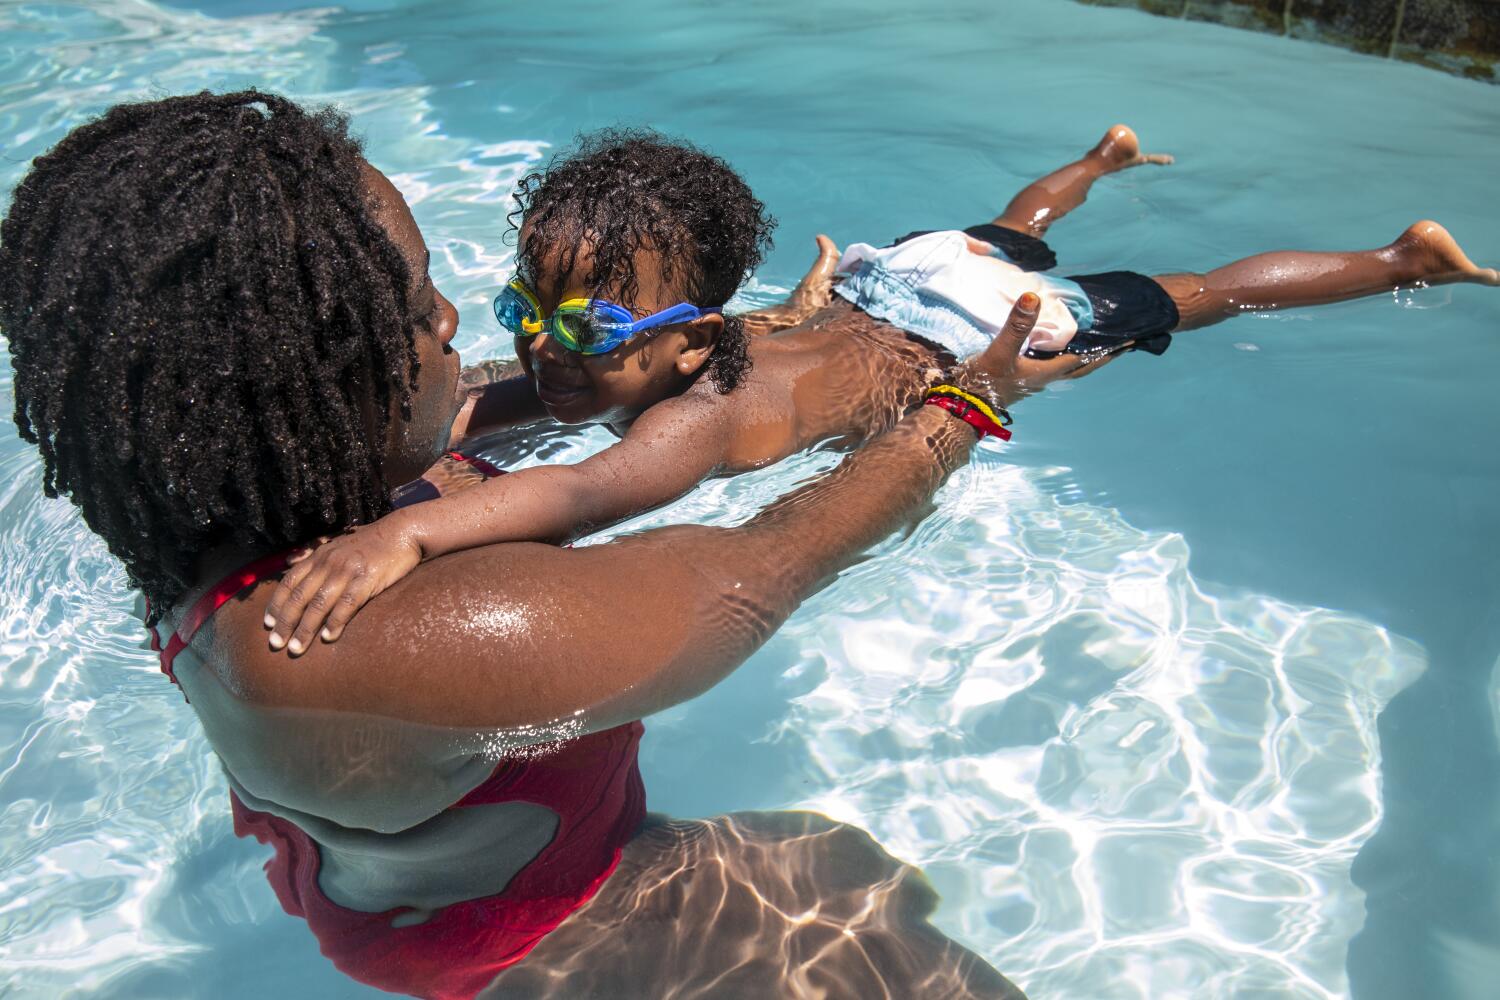 Drownings rose among young children after decades of decline. It's 'highly concerning,' CDC says